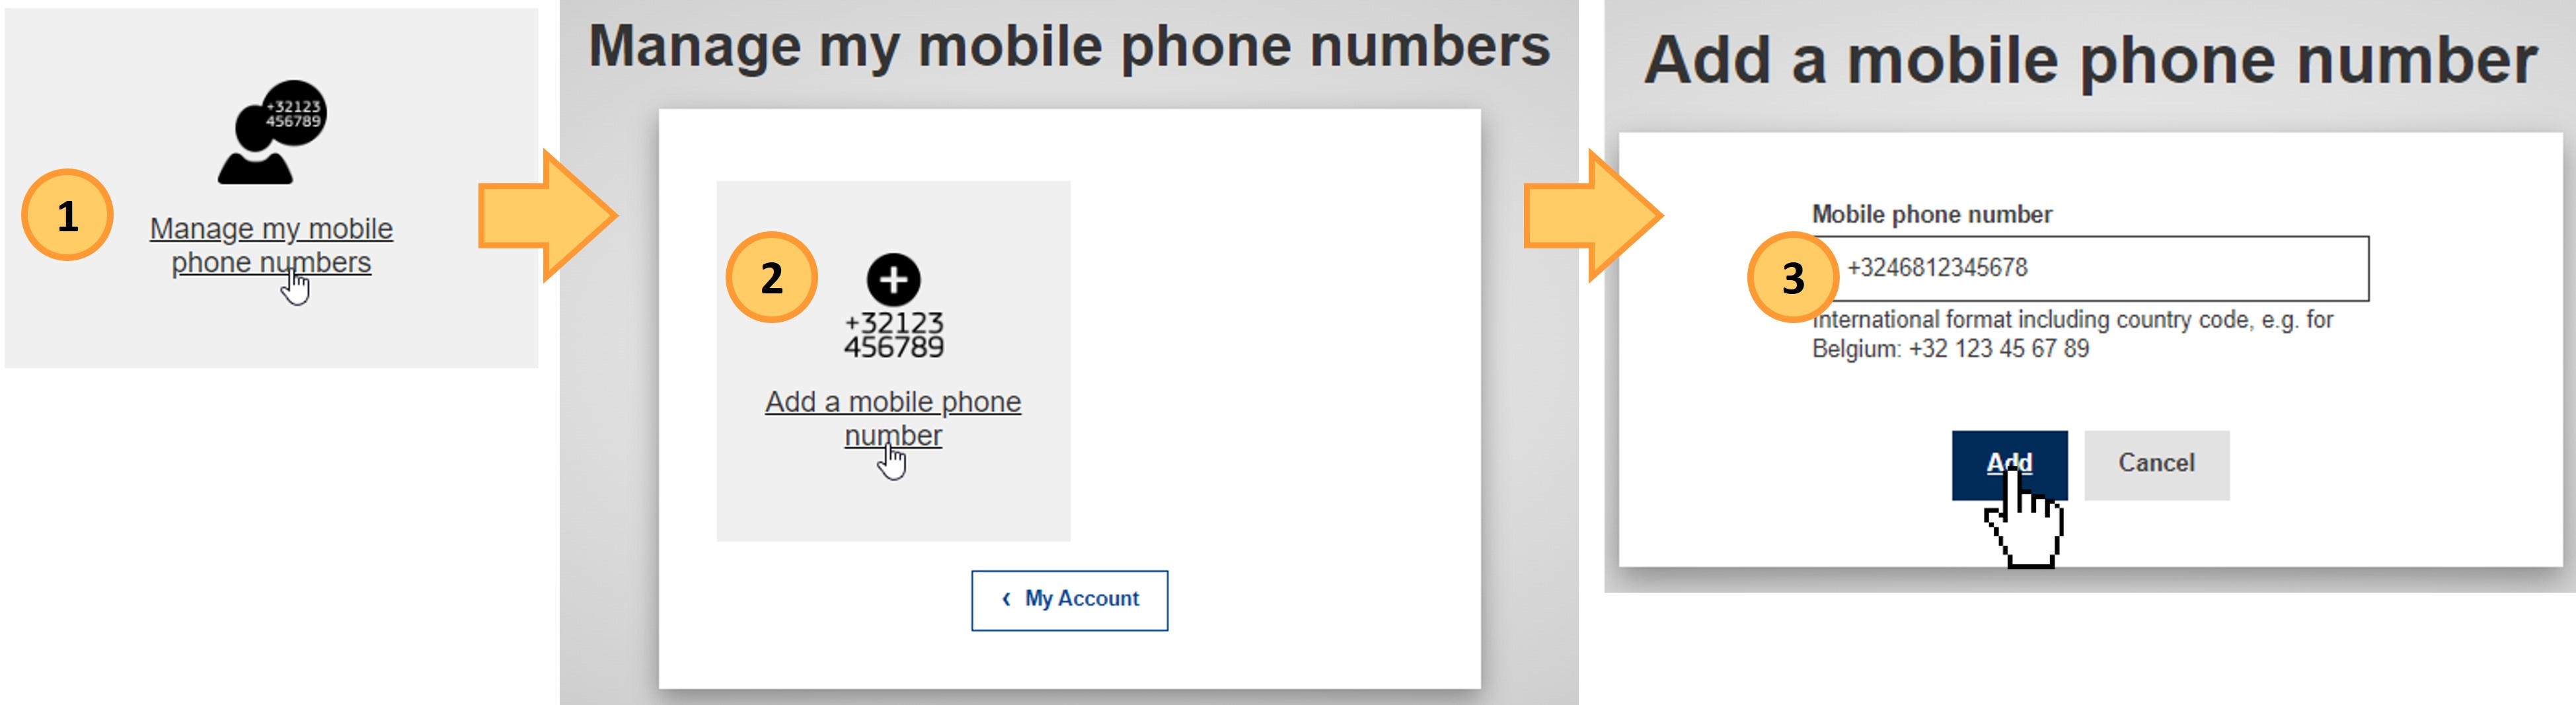 Manage my mobile phone numbers